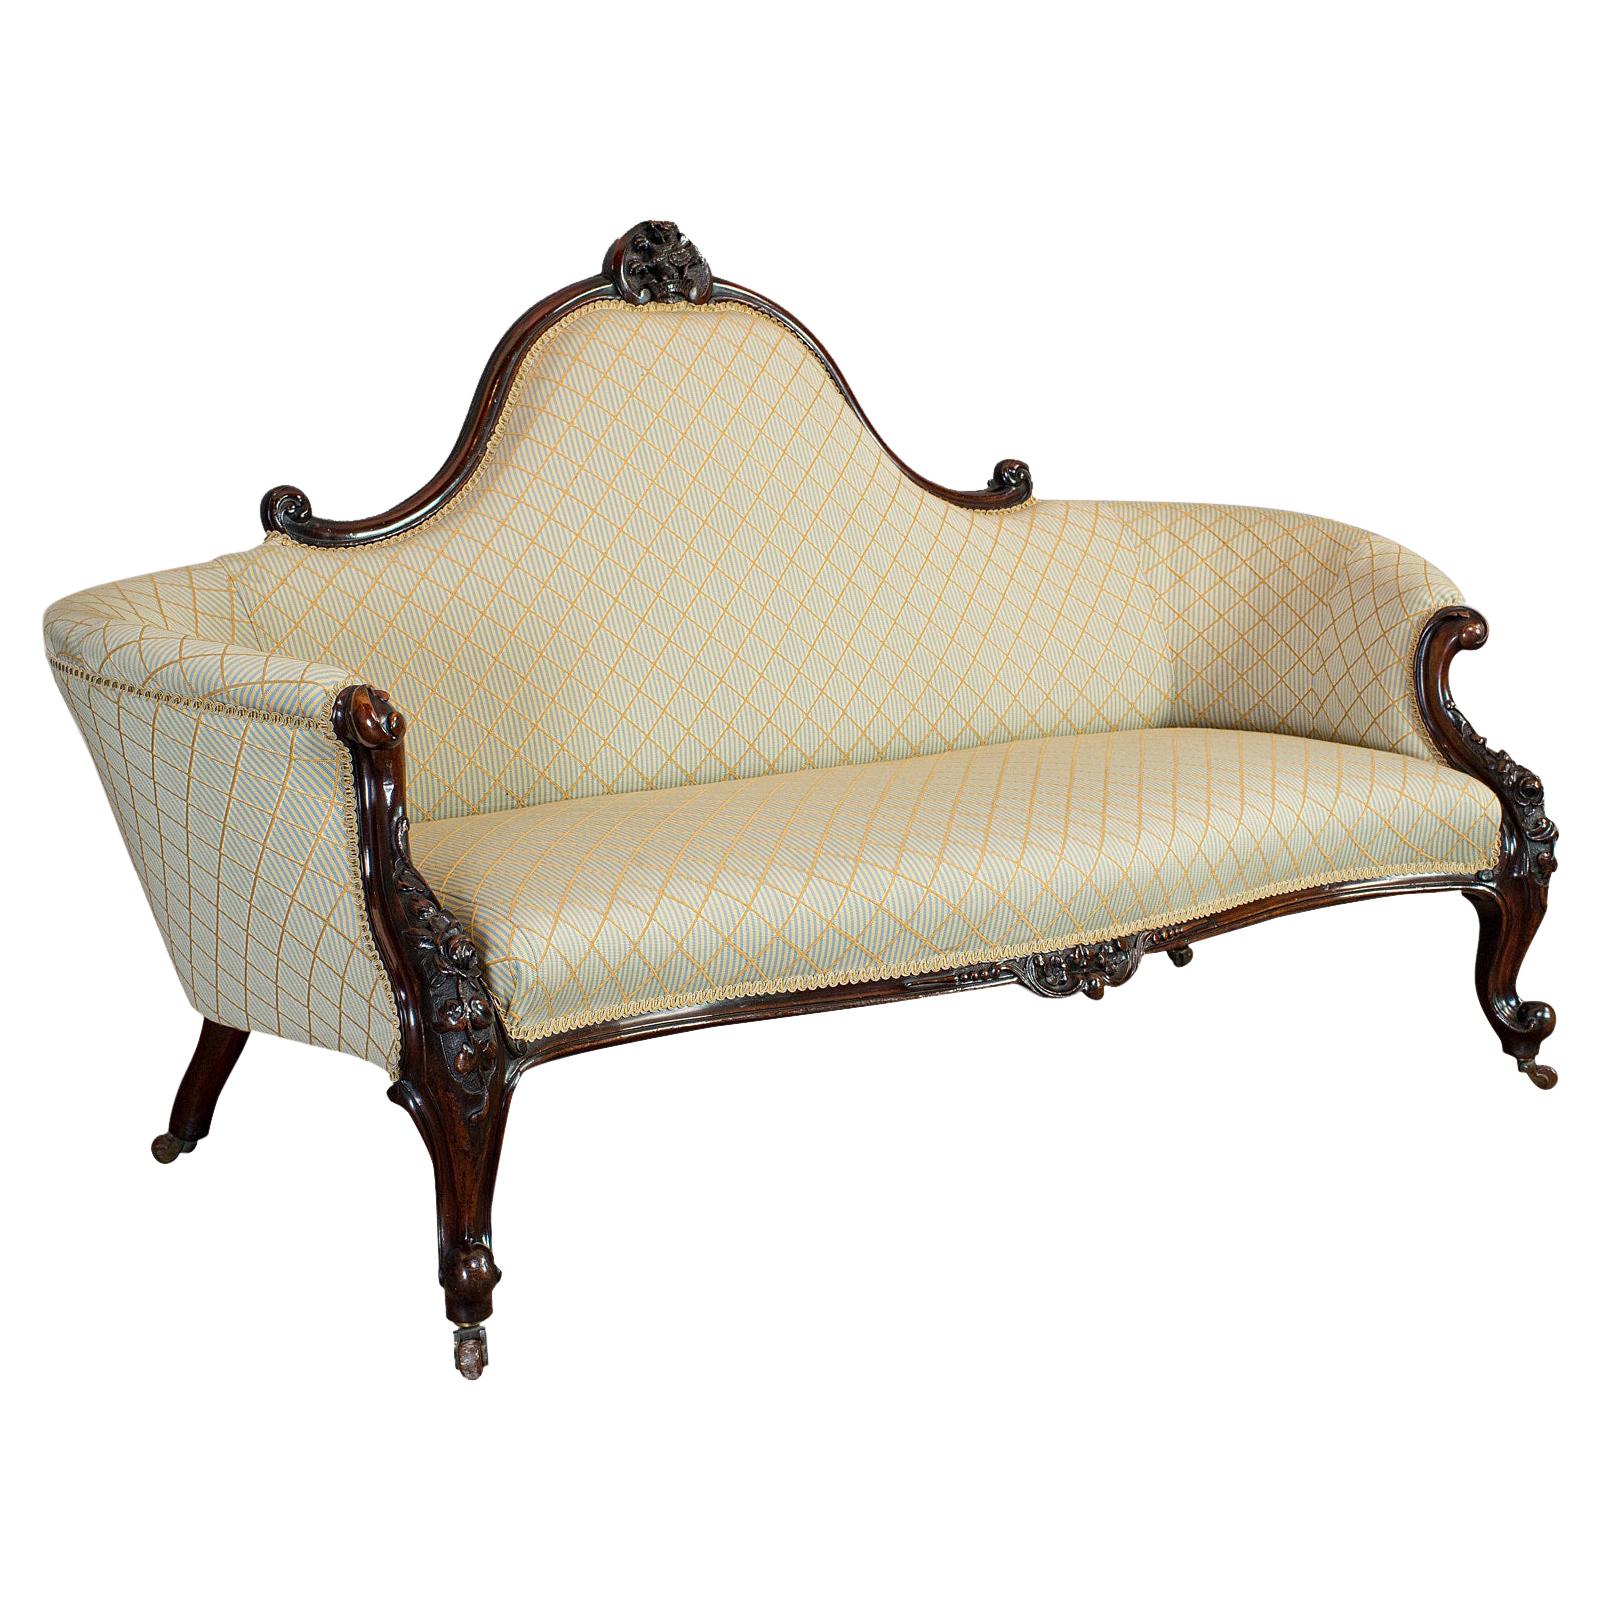 Antique Spoon Back Sofa, English, Walnut, 2-Seat Settee, Early Victorian, 1840